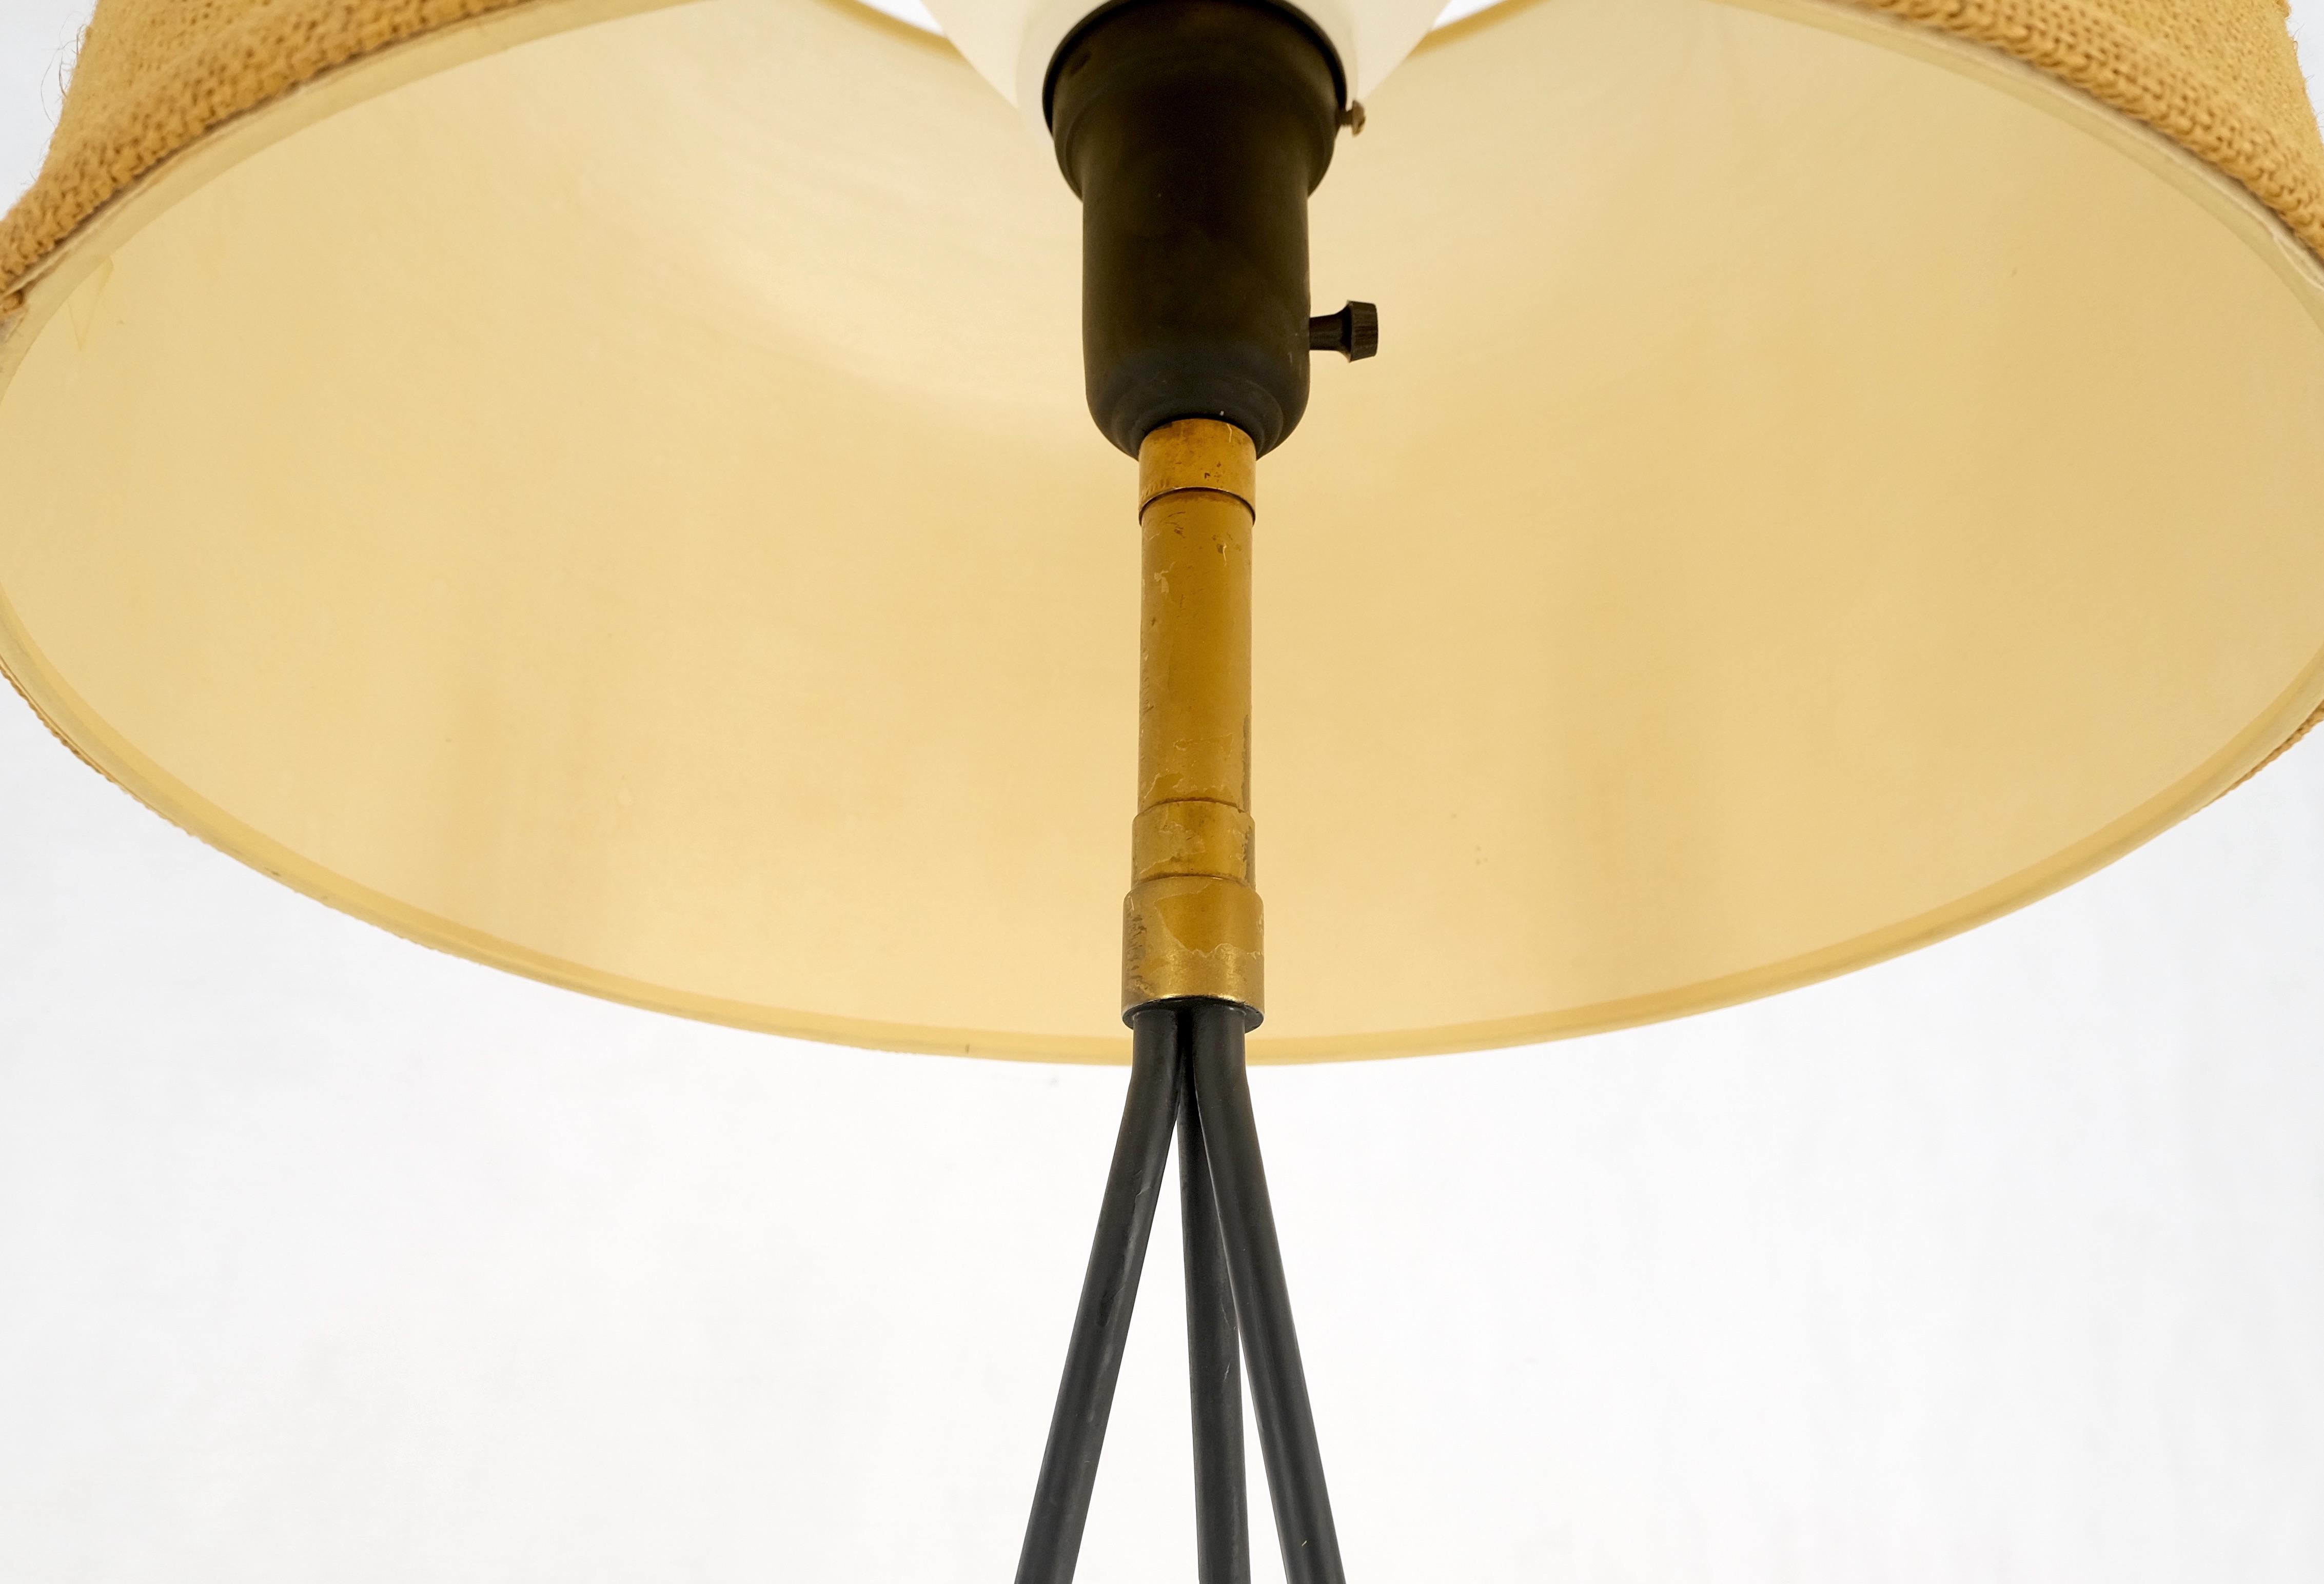 20th Century Mid-Century Modern Wire Tripod Base Brass Finial Floor Lamp For Sale